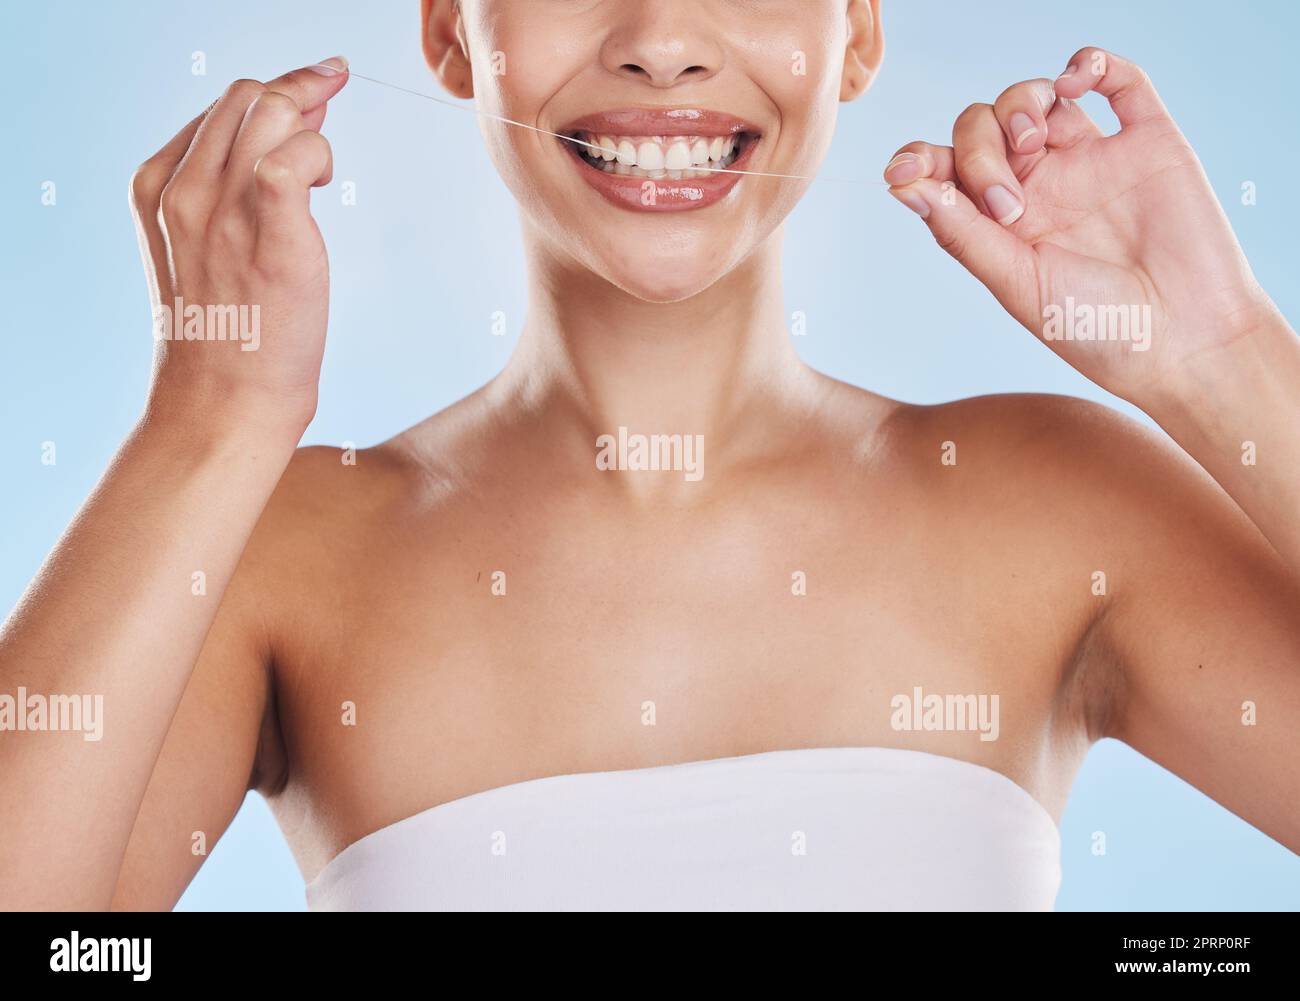 Dental floss, teeth and healthy smile with a beautiful young woman flossing for oral hygiene and gum health. Closeup of a happy female cleaning her mouth during her selfcare wellness routine Stock Photo